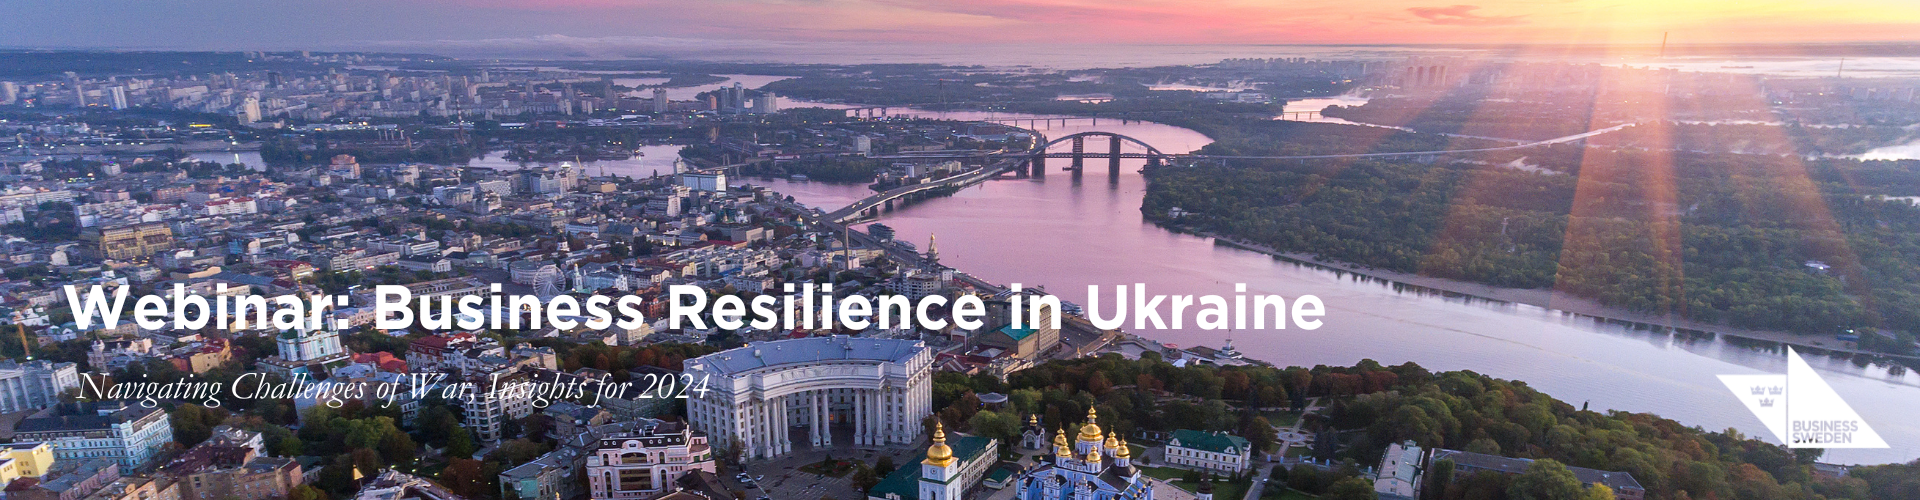 Header image for Business Resilience in Ukraine: Navigating Challenges of War, Insights for 2024 